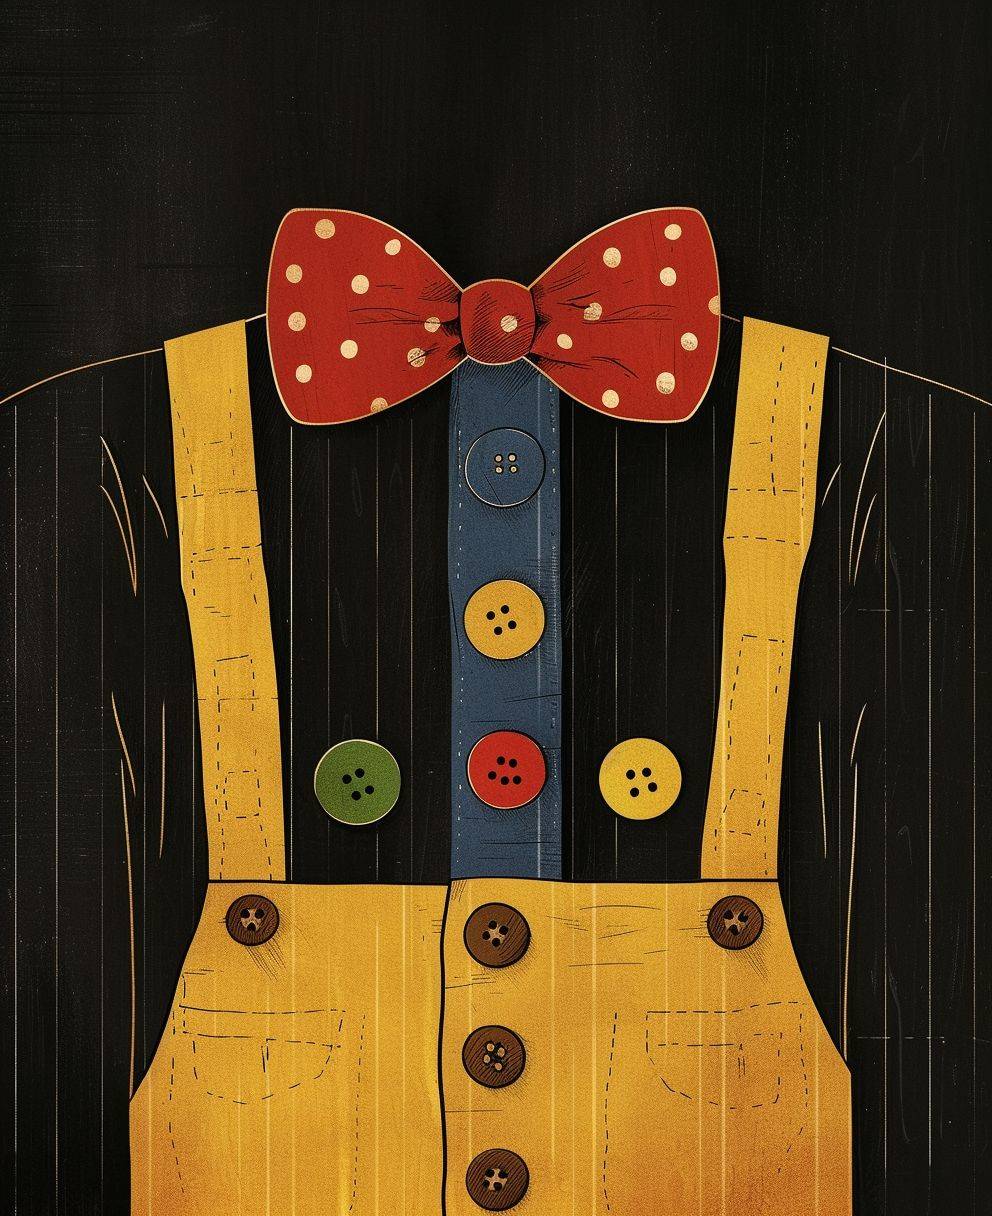 The illustration has a black background with a red bow tie adorned with white polka dots at the top. Two yellow suspenders hang from the shoulders. Dotted lines, suggesting stitching, run down to two brown buttons, which resemble the fastenings on the suspenders. In the center of the torso are 4 oversized colored buttons, in green, blue, yellow and red.